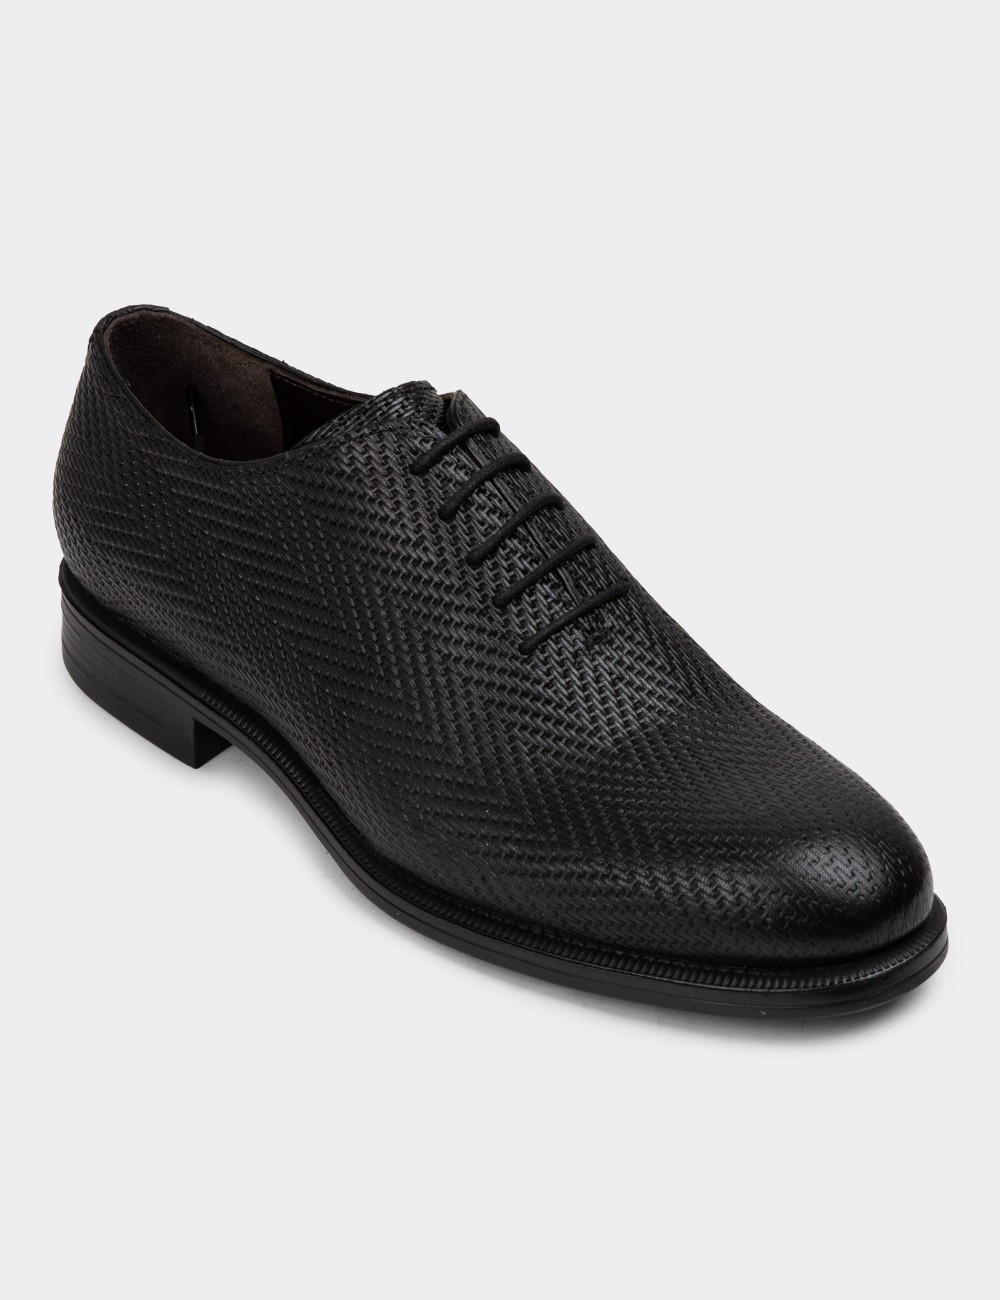 Black Leather Classic Shoes - 01830MSYHC04